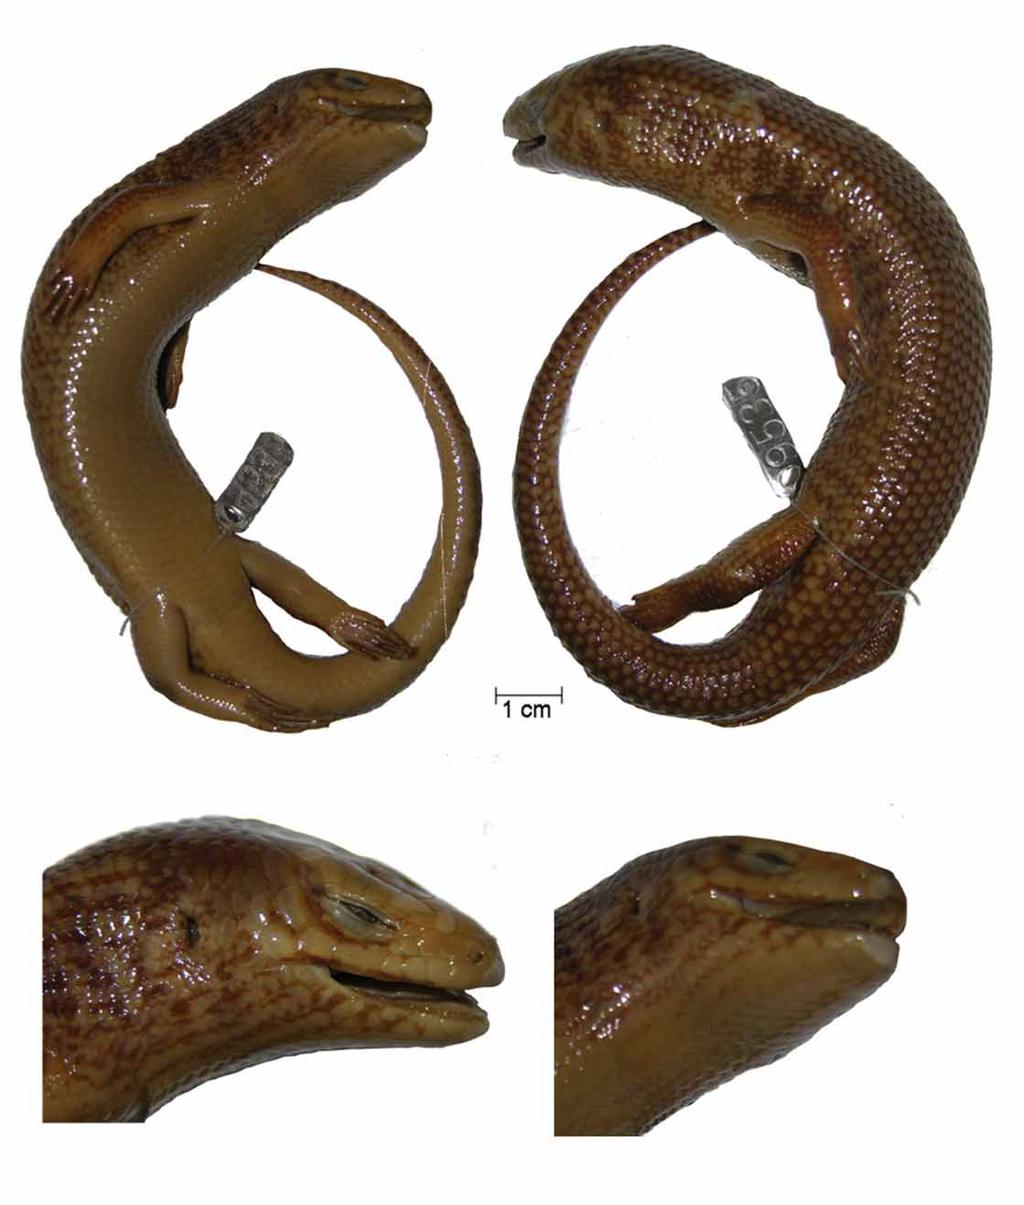 Variation of paratypes: The paratype series agrees in morphology with the given description of the holotype.